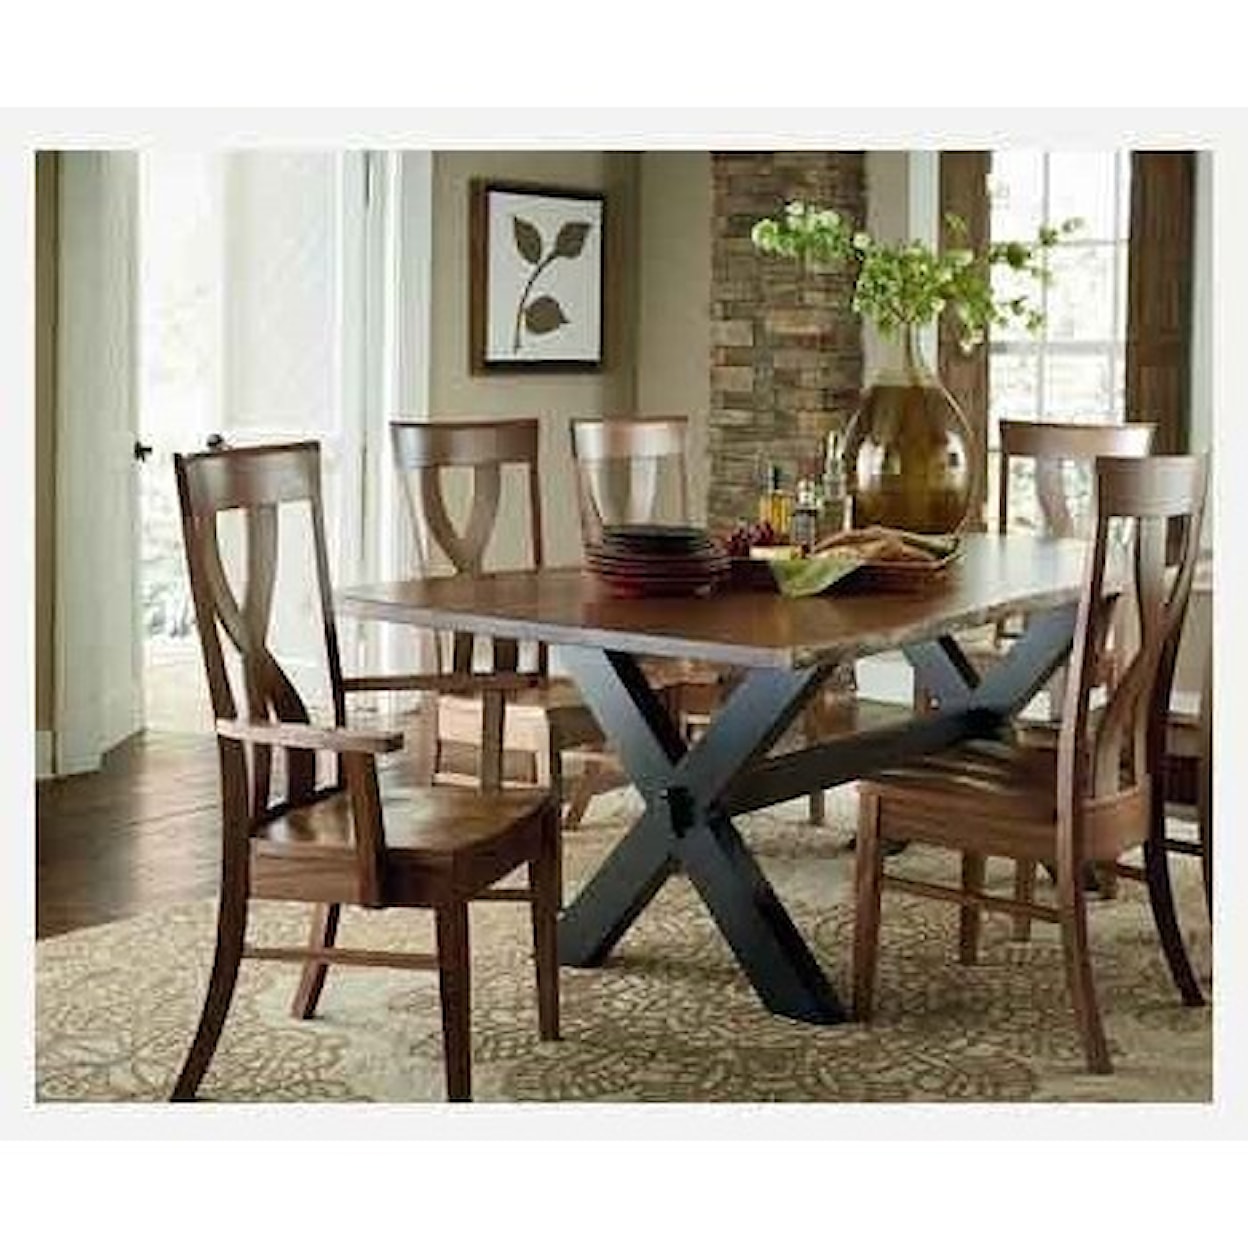 Amish Impressions by Fusion Designs Xander Customizable Trestle Table 42" x 90"